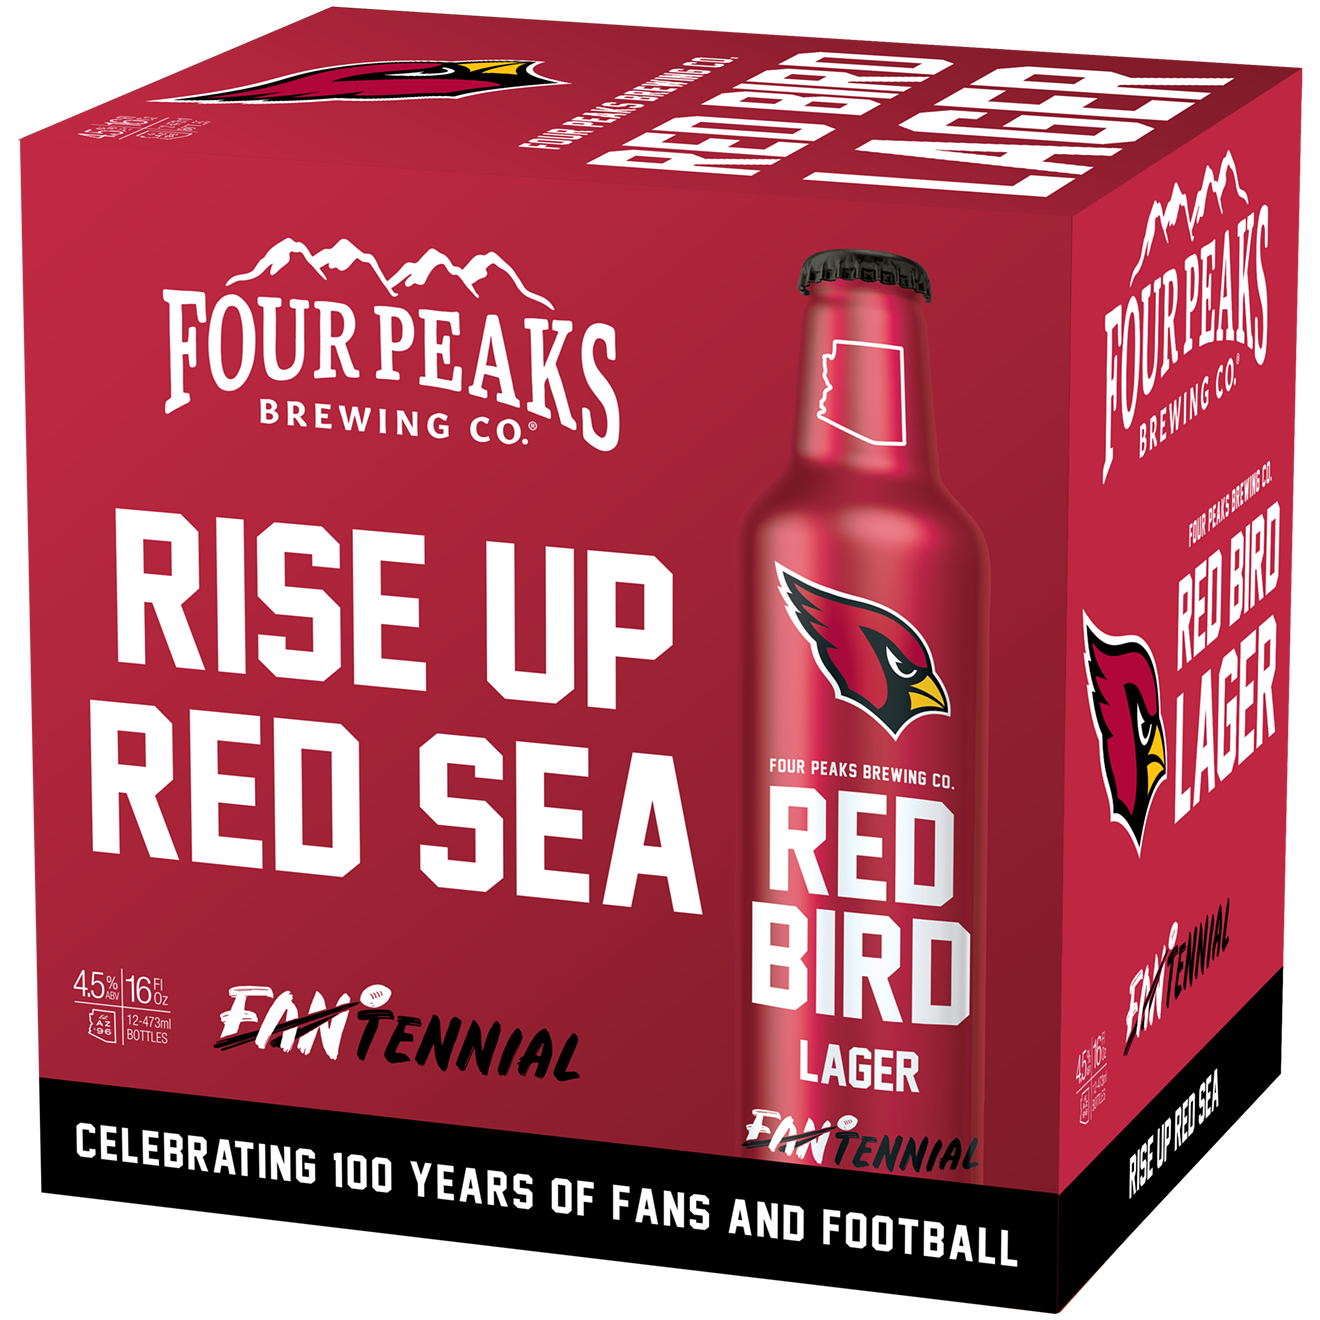 Four Peaks Brewing Co. is releasing Red Bird Lager in partnership with the Arizona Cardinals.